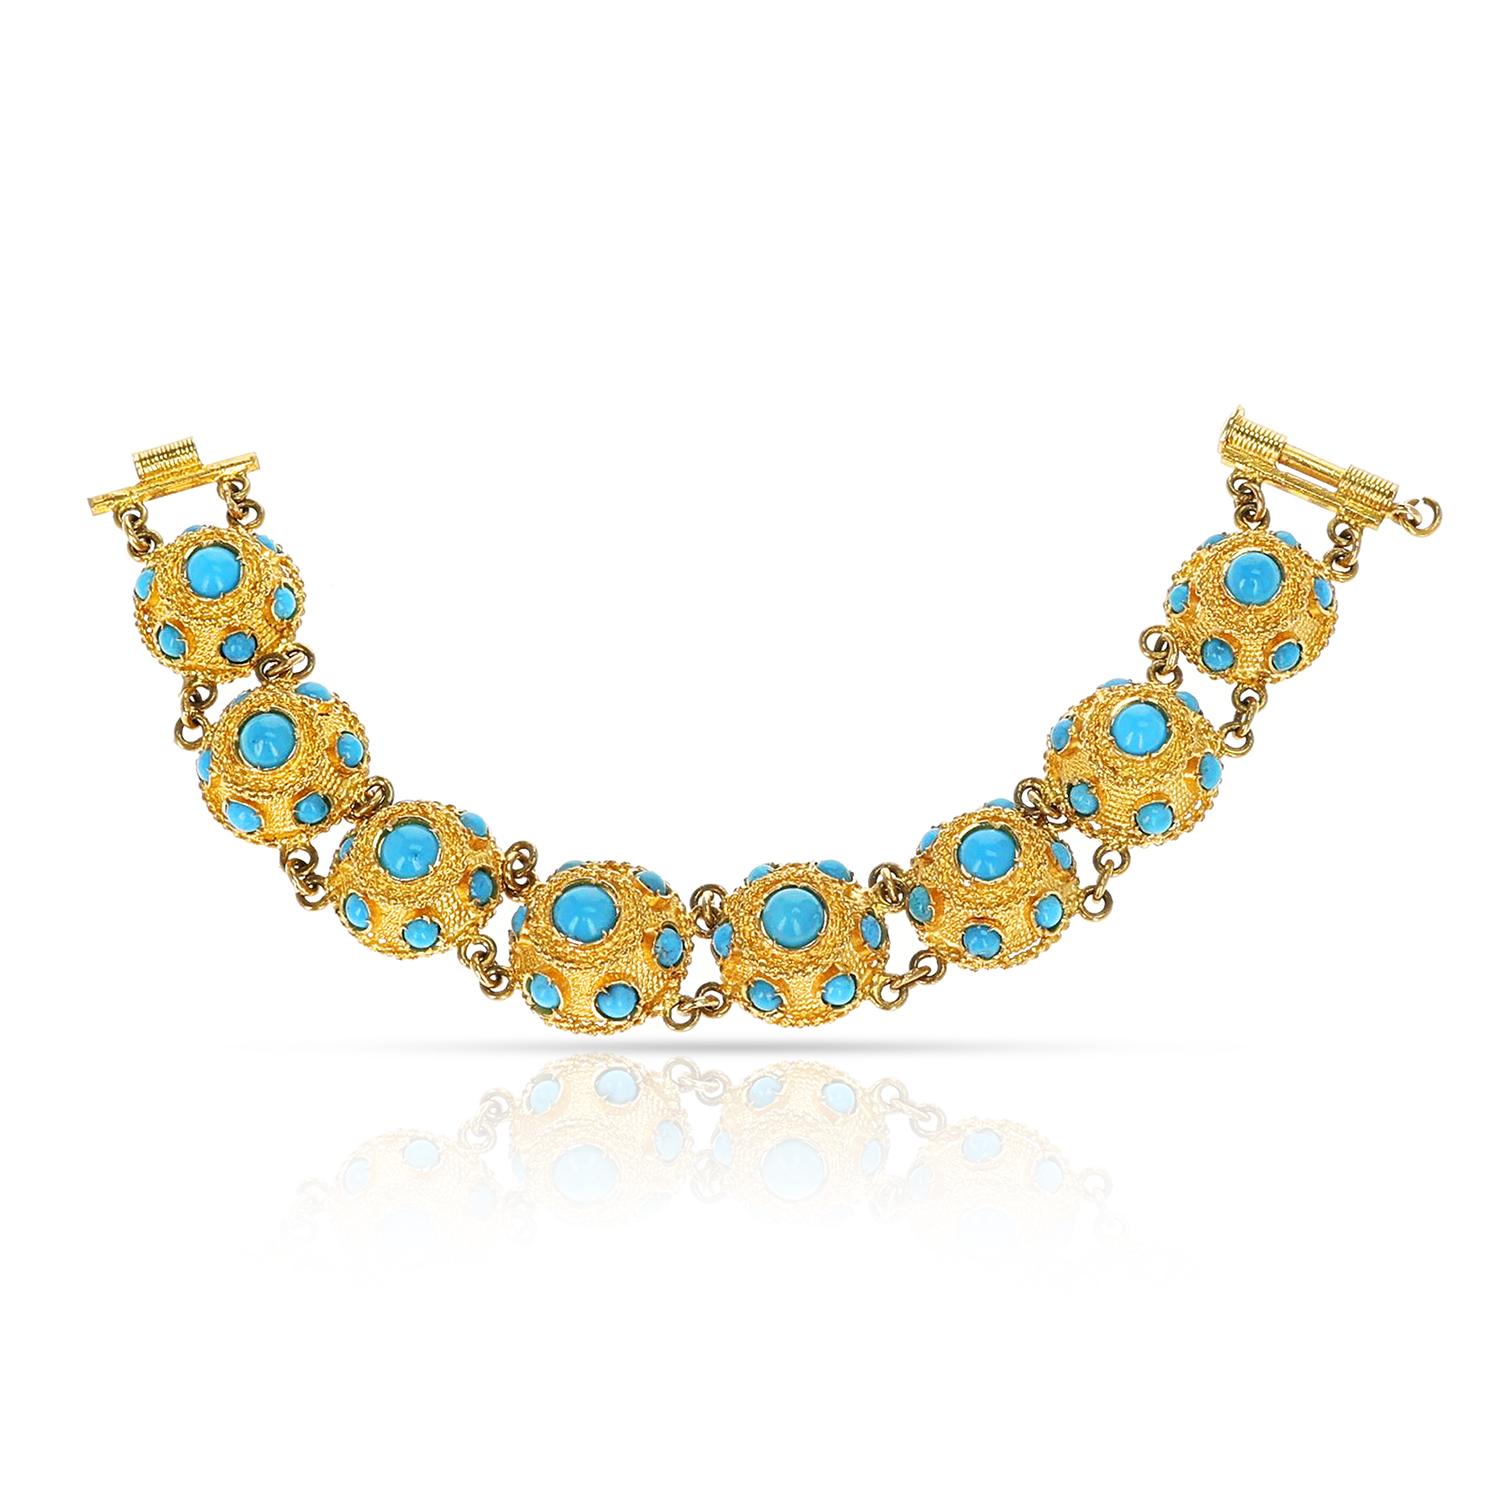 A Turquoise and Gold Bracelet. The bracelet is 6.5 inches. The set consists of: Two pairs of earrings, a ring and a bracelet.
